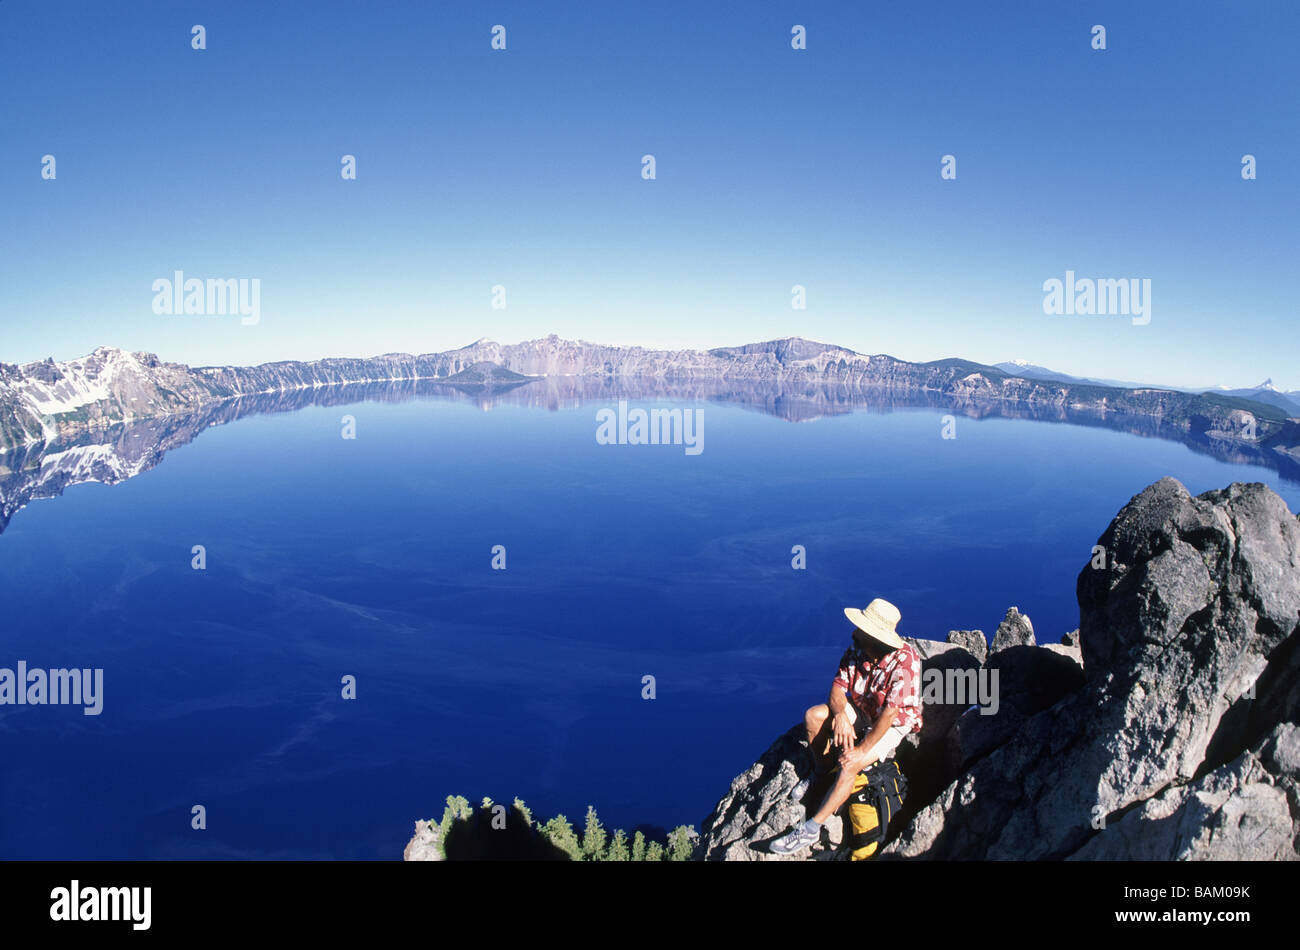 Hiker by crater lake Stock Photo